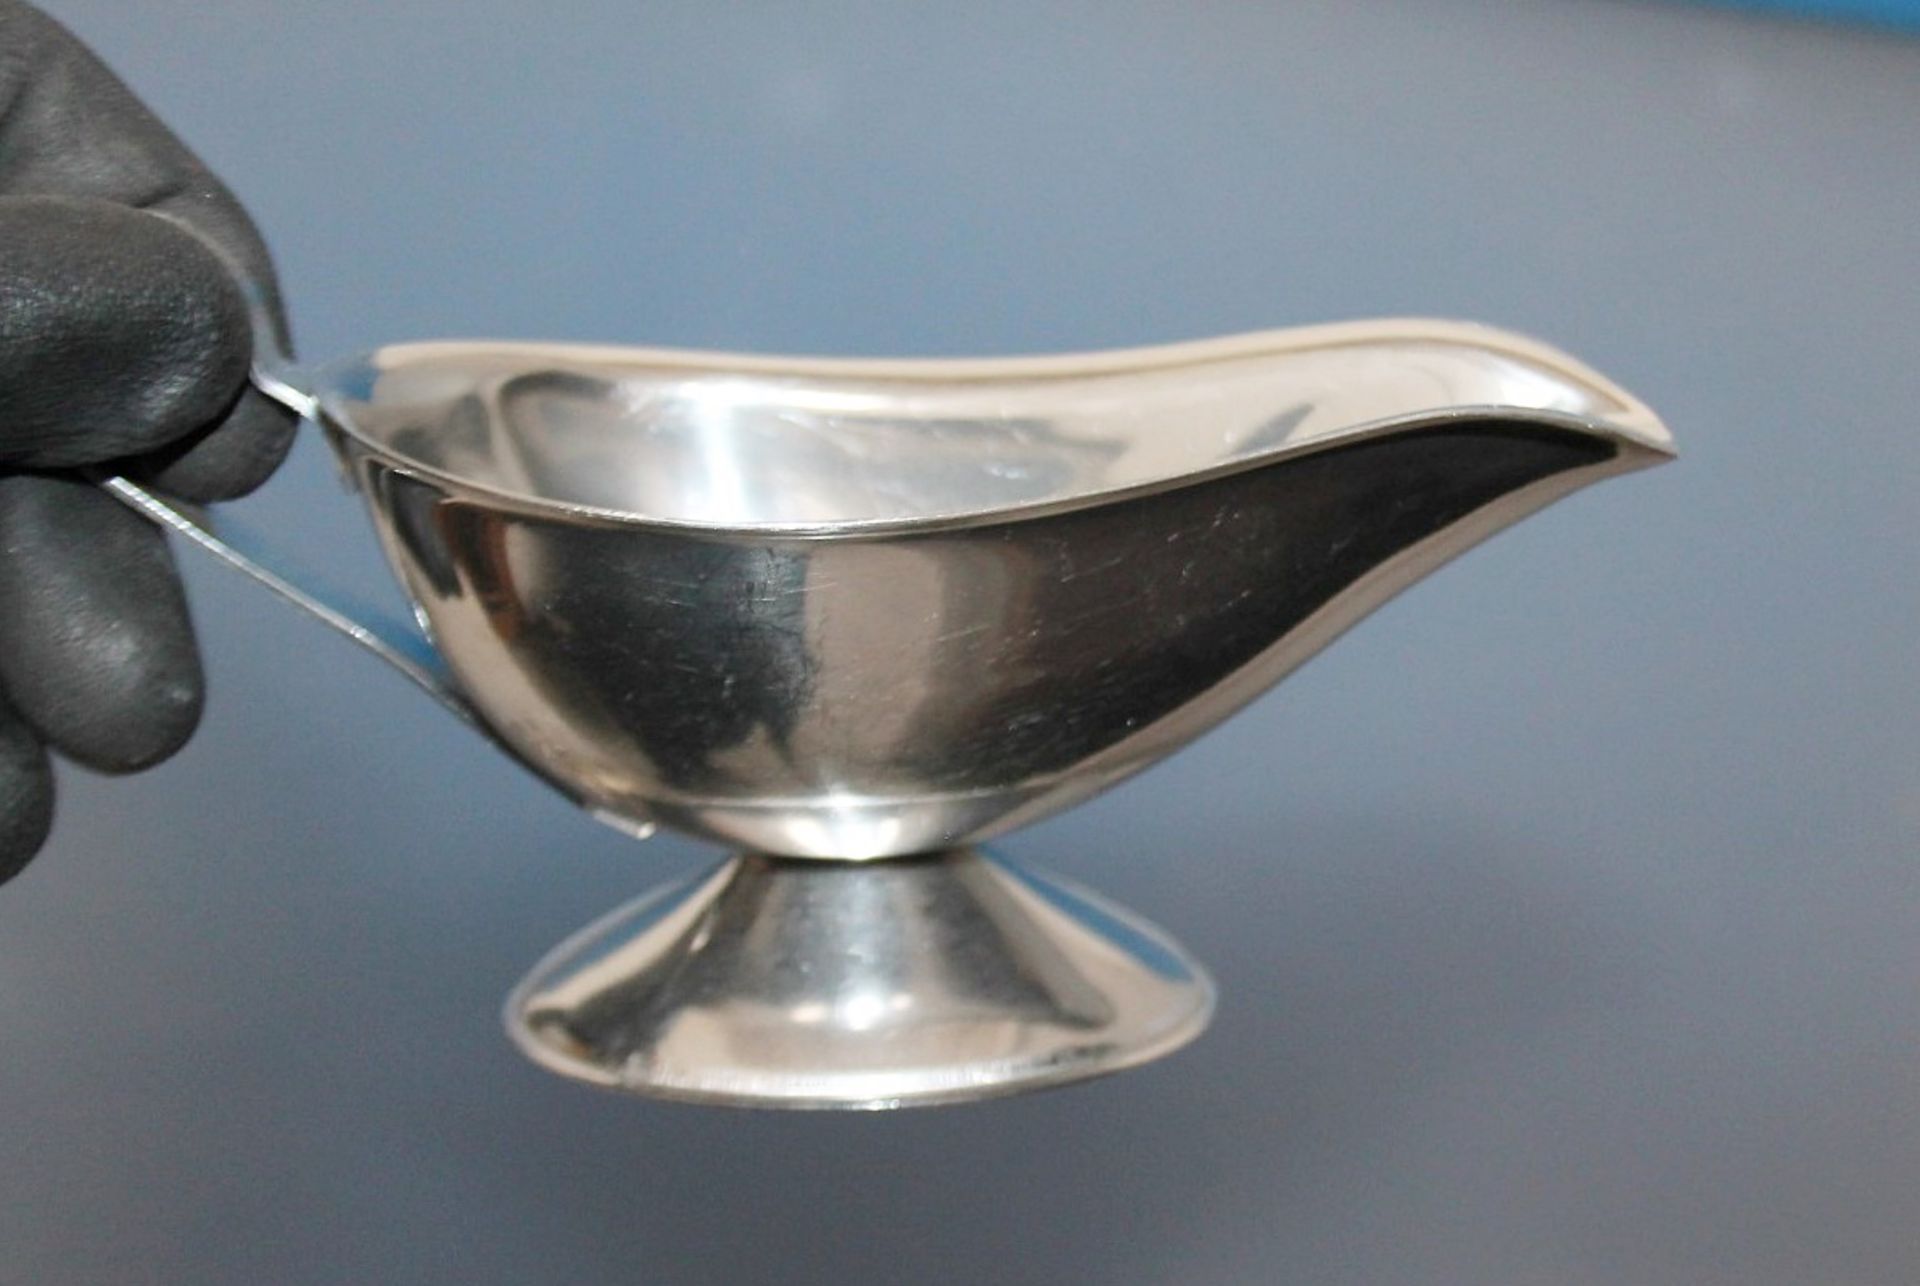 30 x Assorted Silver-Plated Sauce Boats - The Majority Strong and Woodhatch Branded - Recently - Image 6 of 8